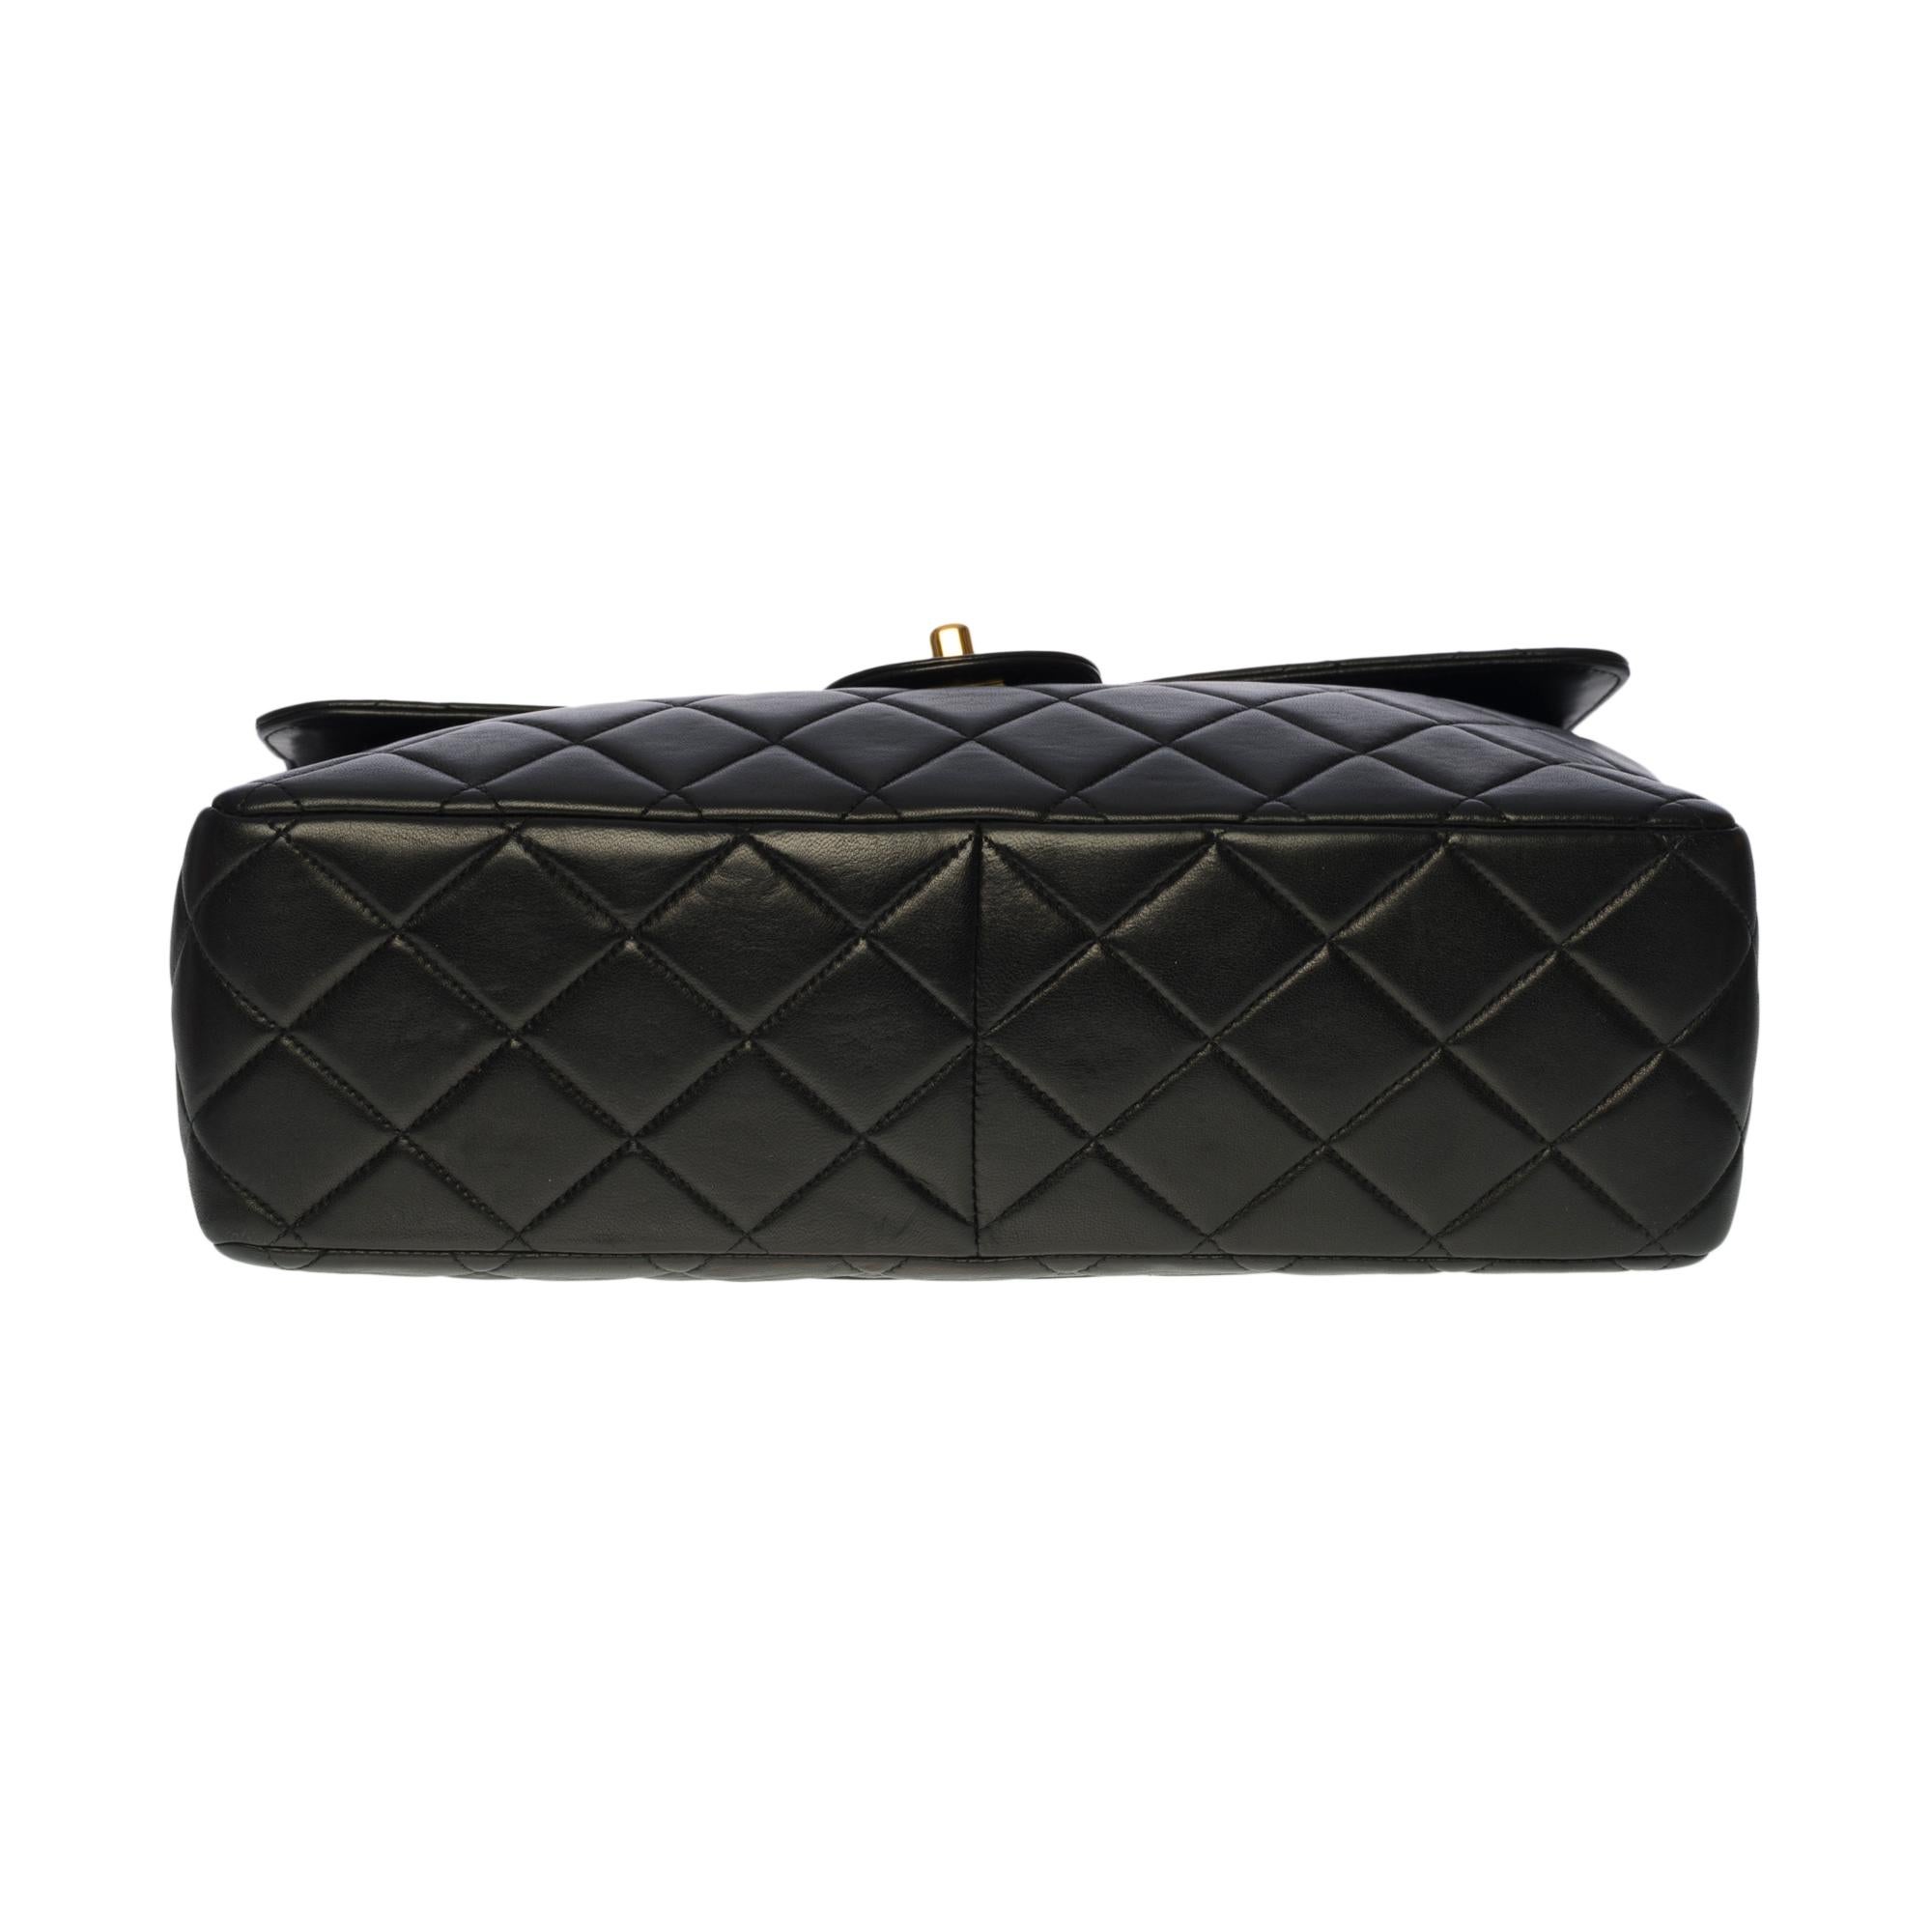 Chanel Timeless Jumbo single shoulder flap bag in black quilted lambskin, GHW For Sale 5